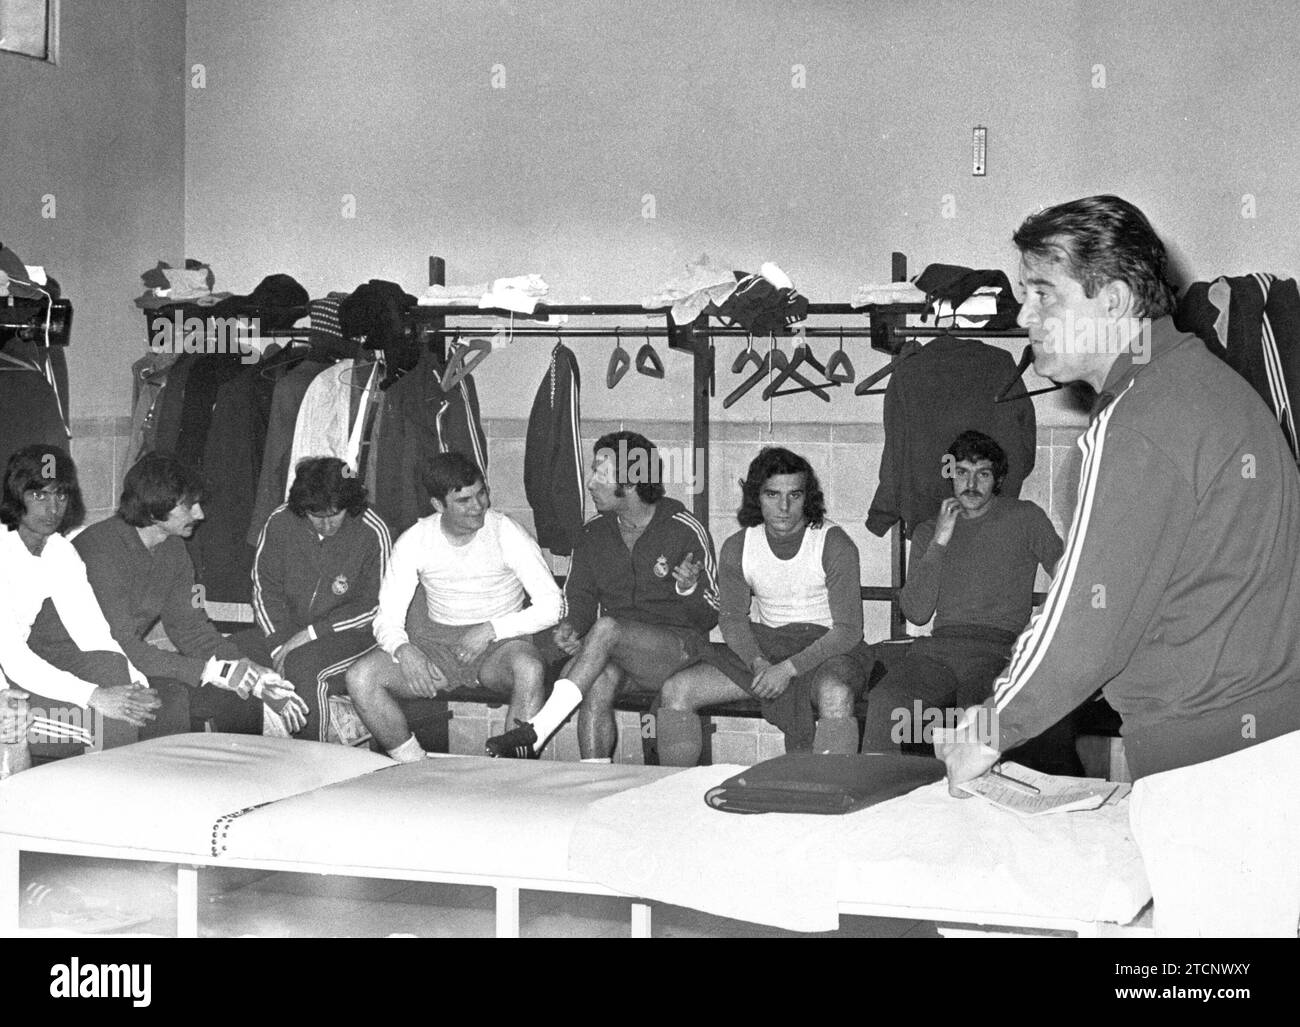 03/01/1976. Stadiums - Santiago Bernabeu - Changing rooms - Miljanic gives a talk to his players moments before facing Bayern Munich in the first leg of the semi-final of the European Champions League Cup. Credit: Album / Archivo ABC / Luis Ramírez Stock Photo